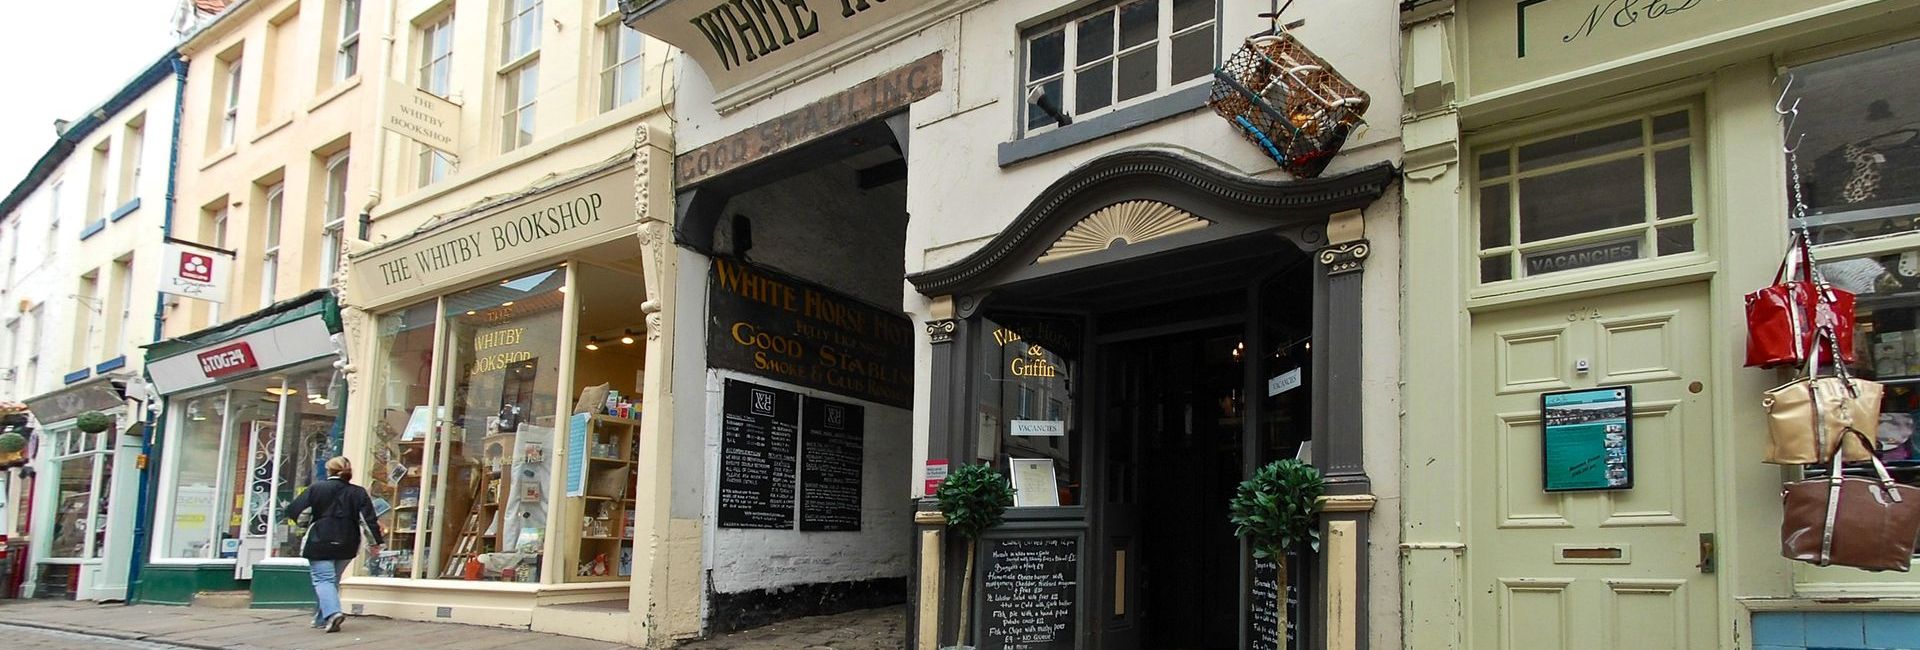 The White Horse & Griffin in Whitby, North Yorkshire